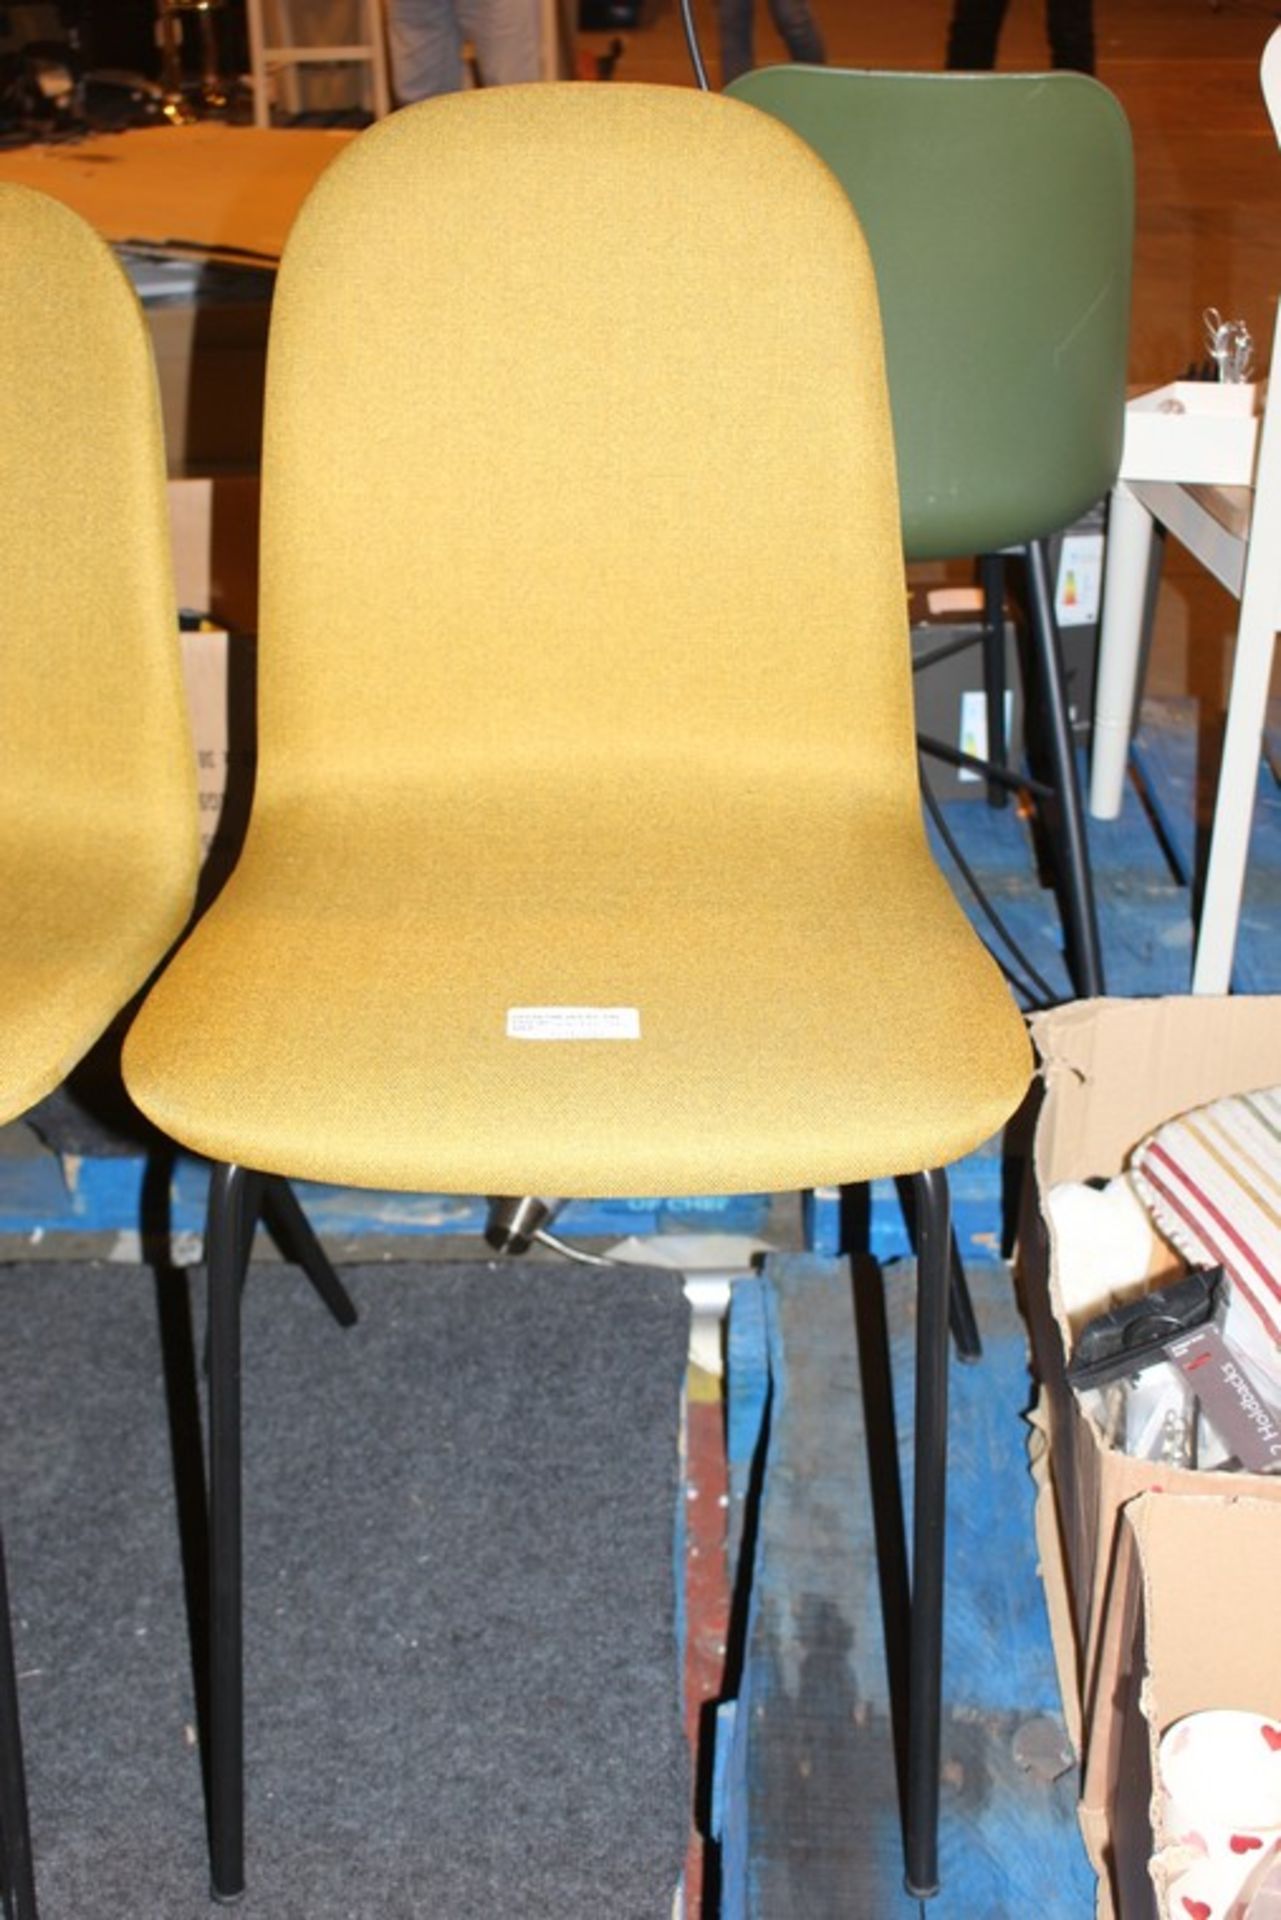 1 x FLUENT UPHOLSTERED DINING CHAIR RRP £160 (03.01.18) (4491136) *PLEASE NOTE THAT THE BID PRICE IS